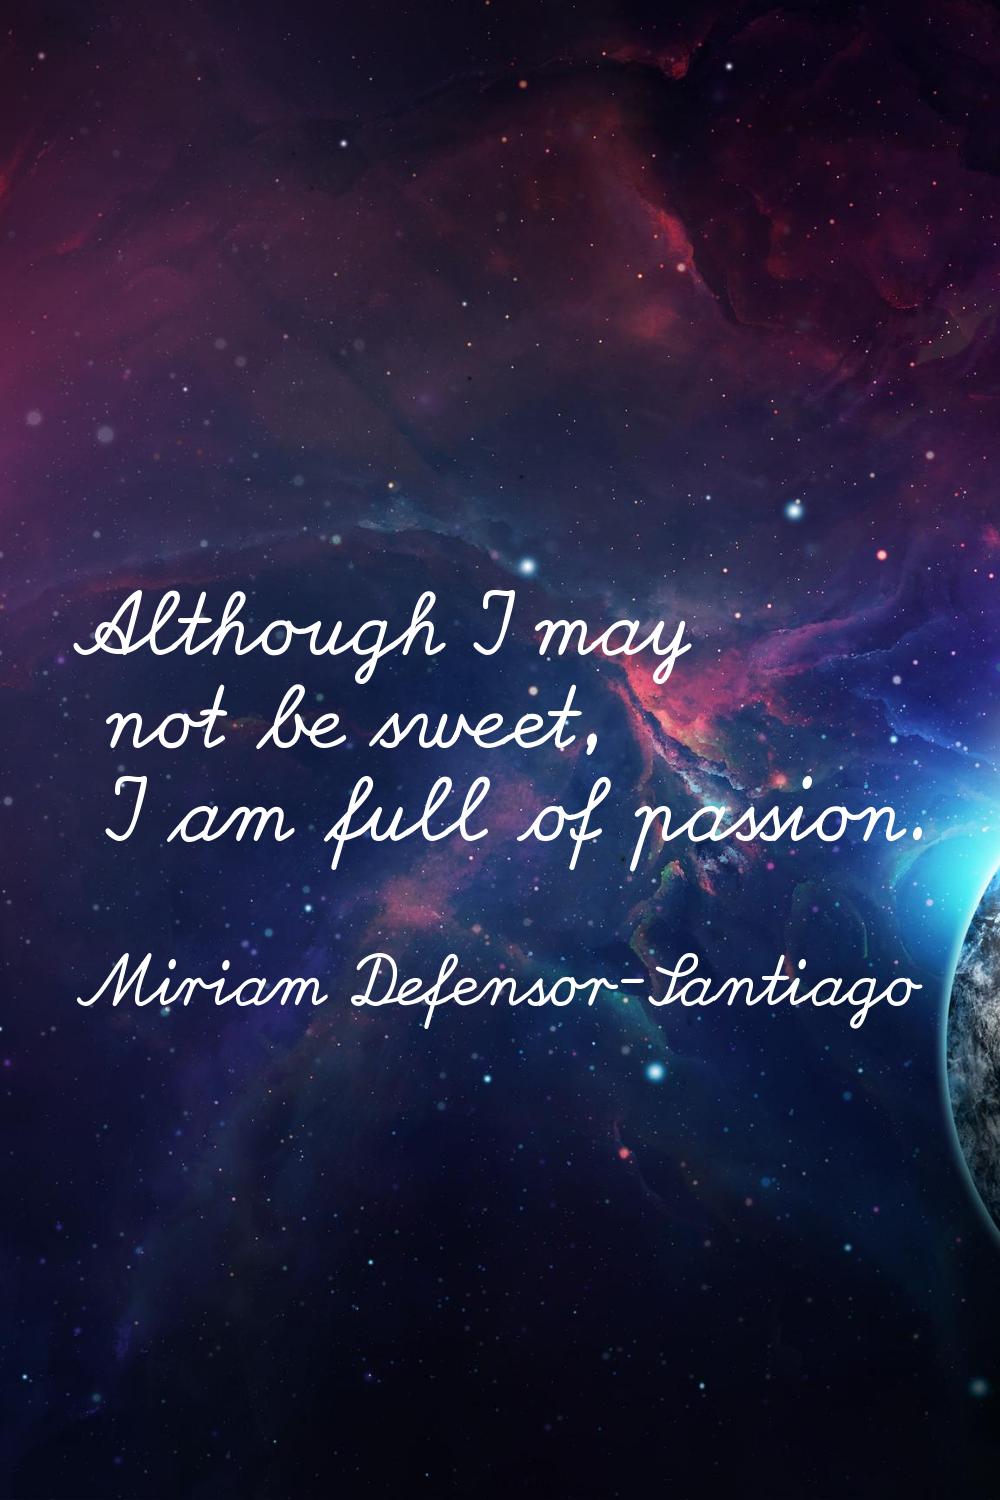 Although I may not be sweet, I am full of passion.